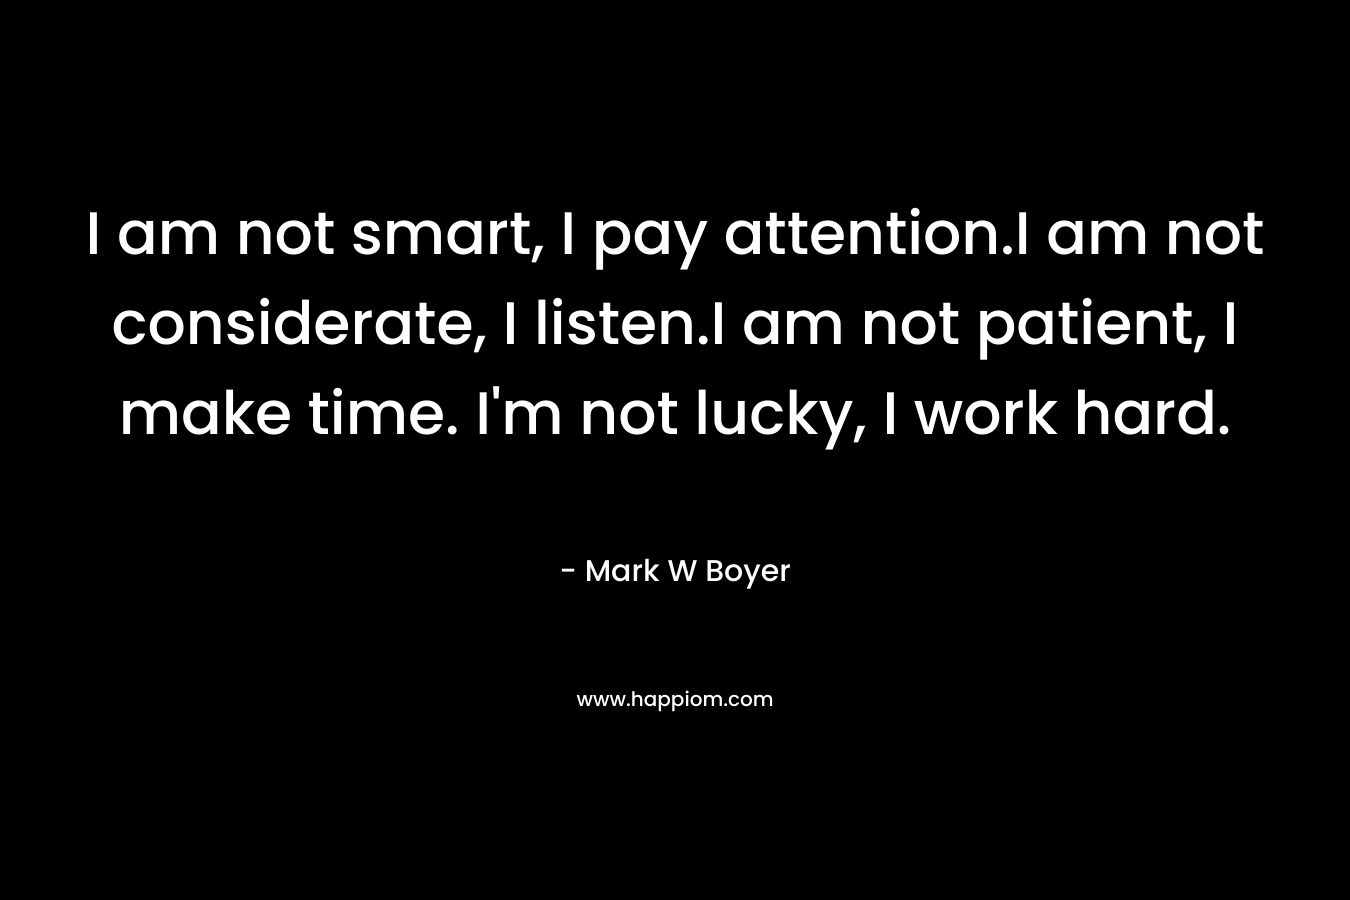 I am not smart, I pay attention.I am not considerate, I listen.I am not patient, I make time. I'm not lucky, I work hard.